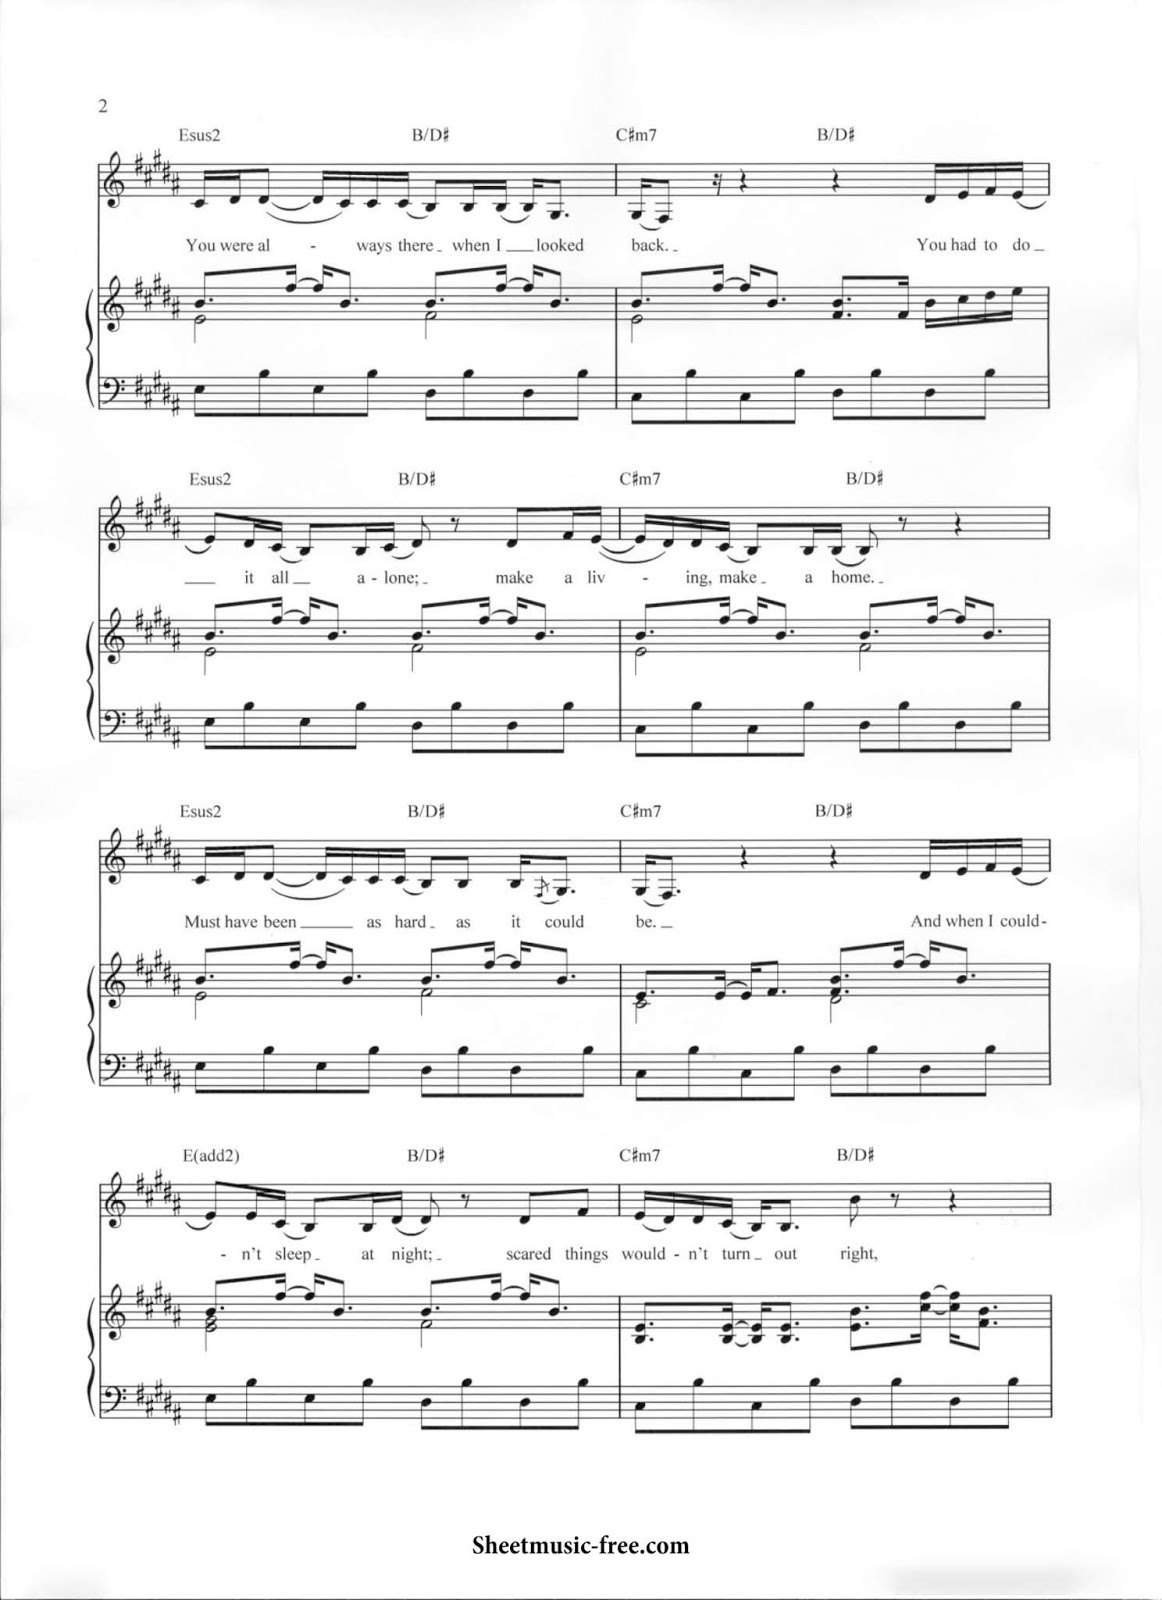 Butterfly for guitar. Guitar sheet music and tabs.